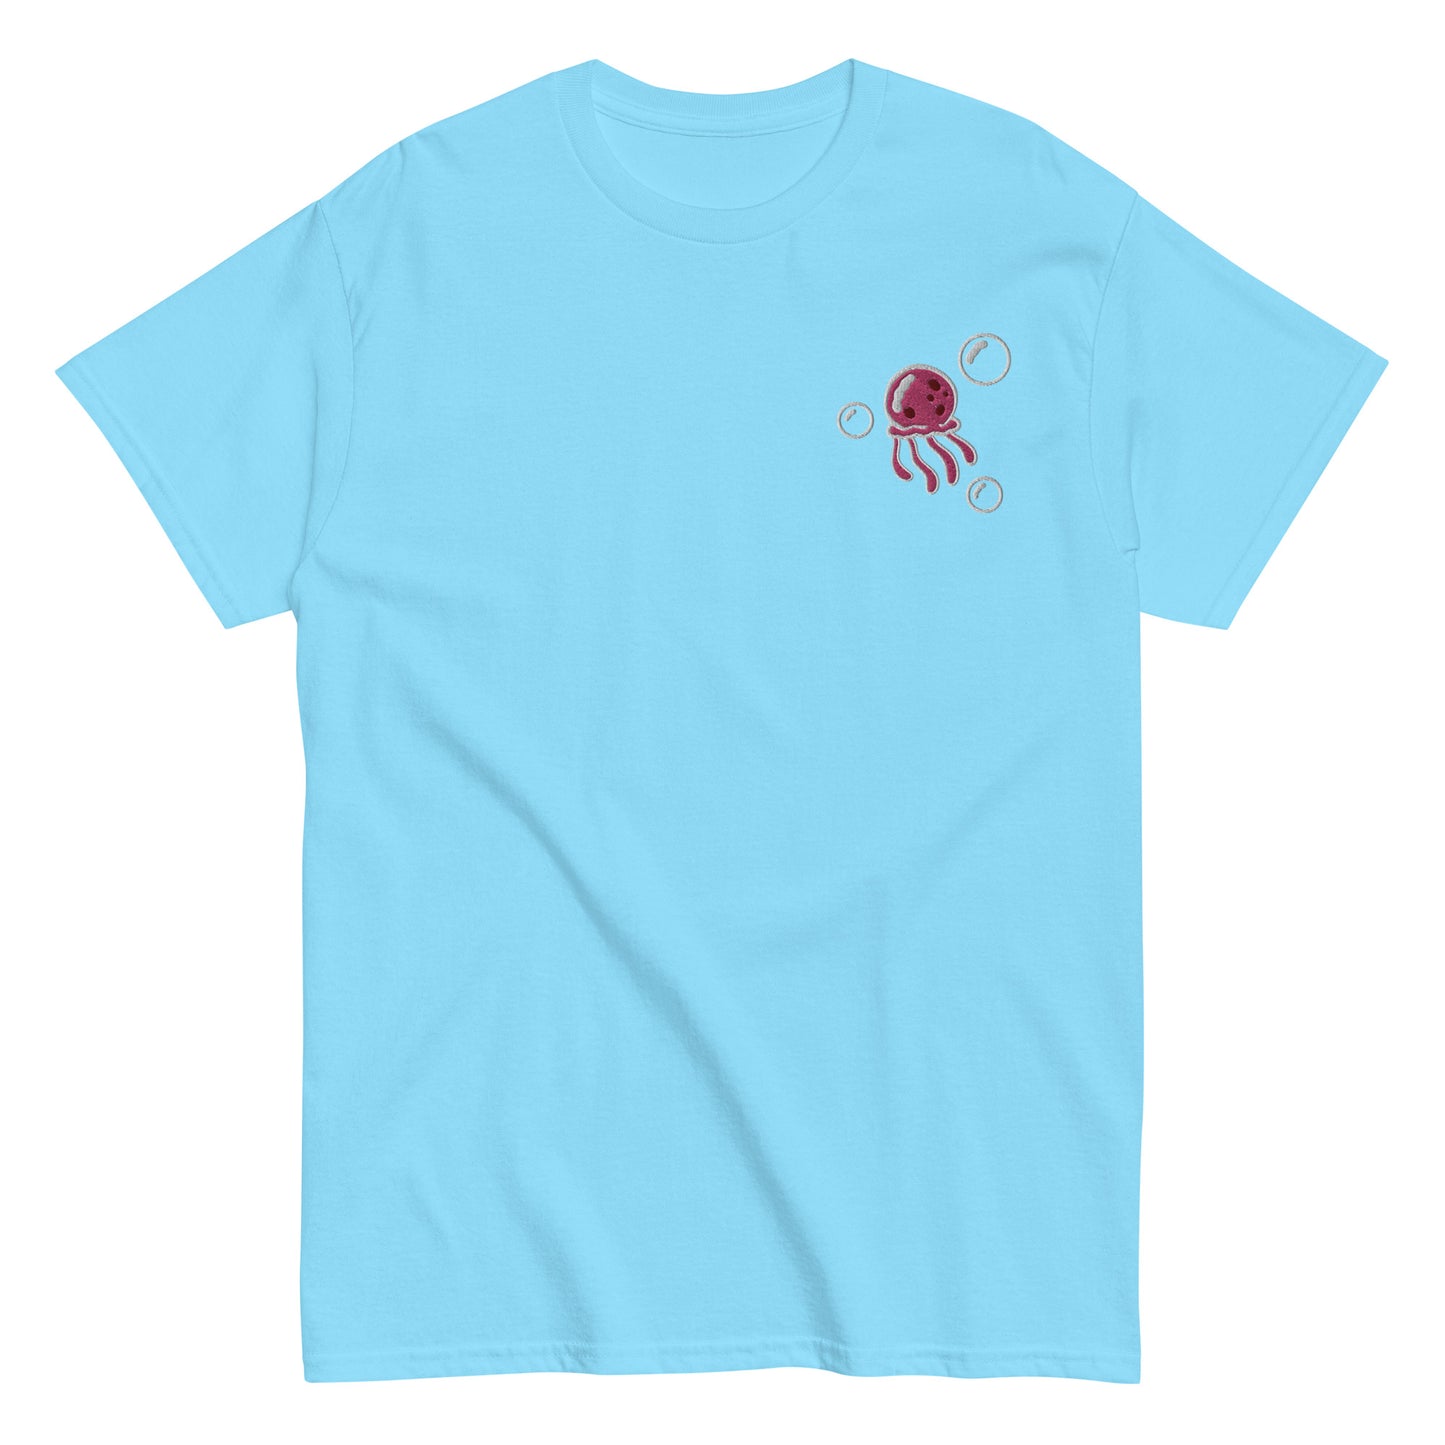 Jellyfish PINK embroidered t-shirt